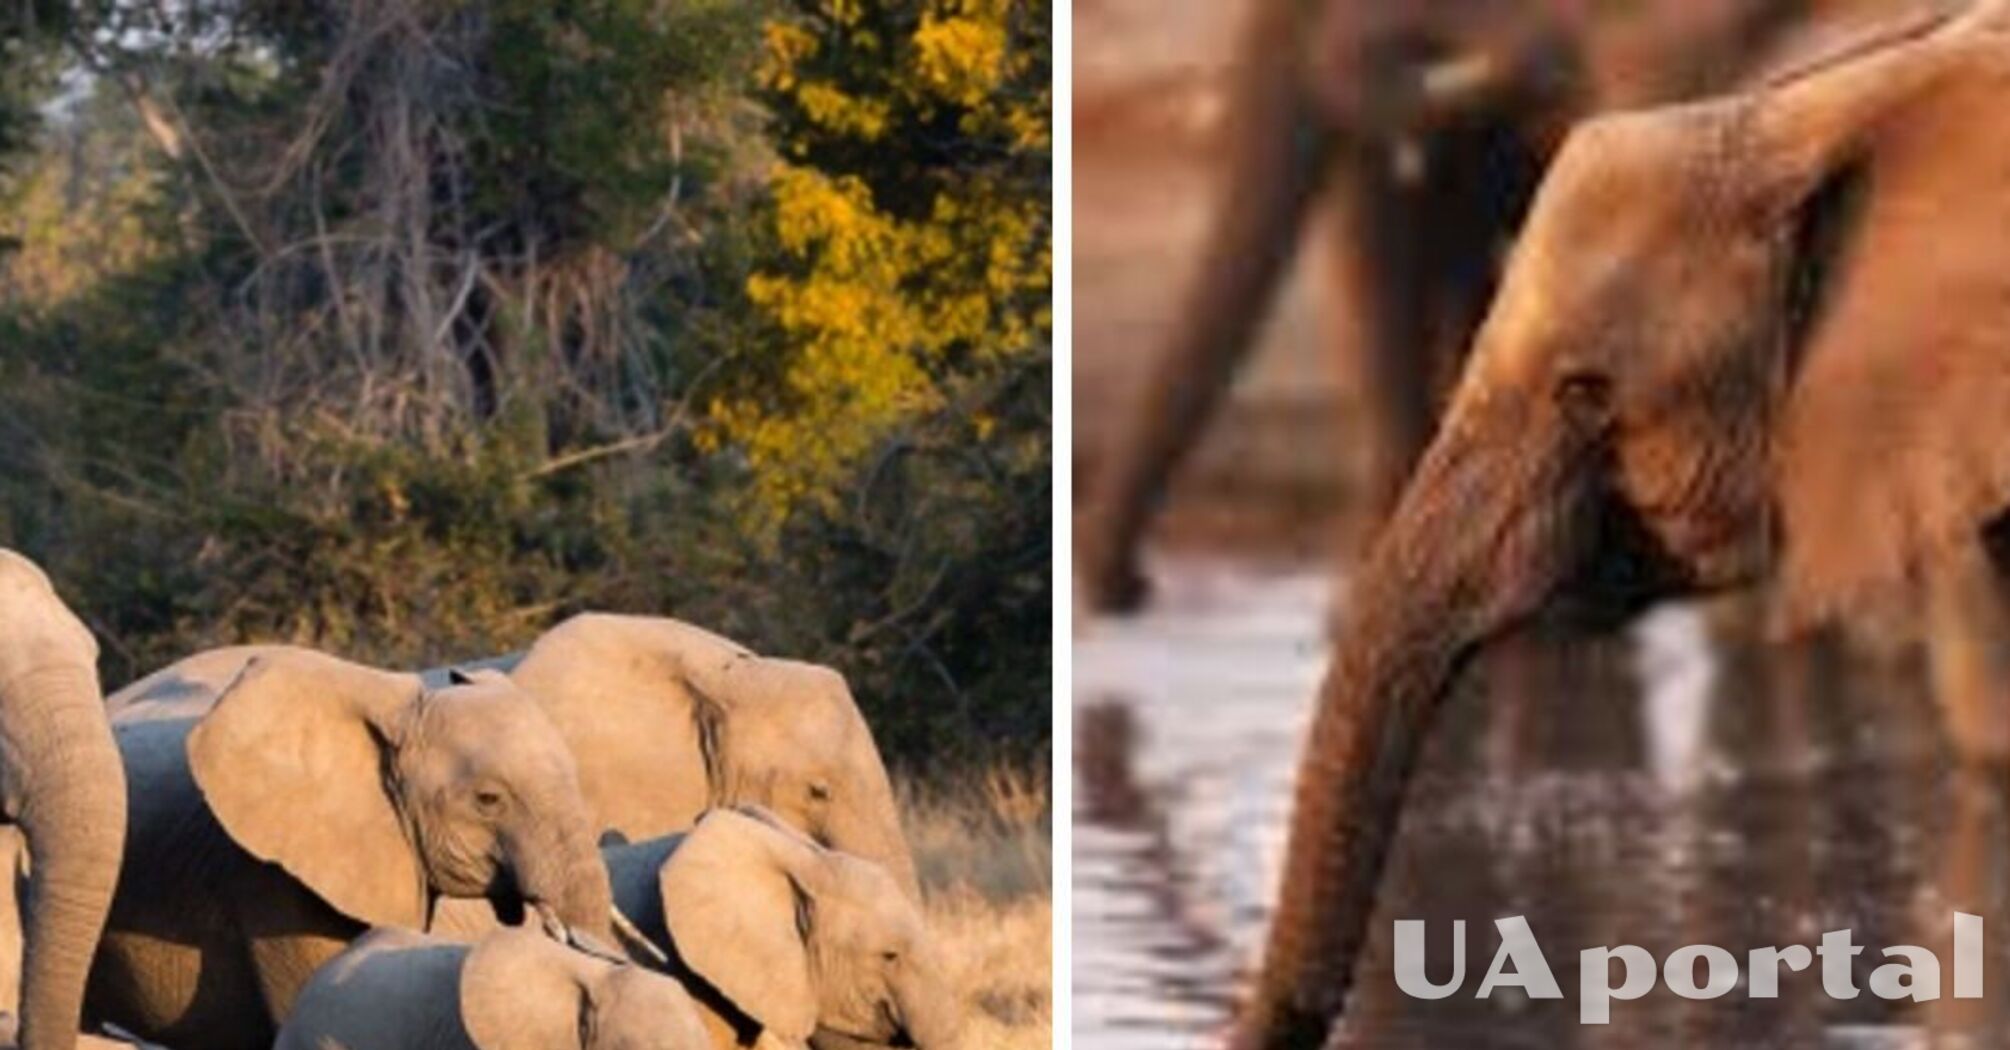 Scientists have discovered a unique ability of elephants: they call each other by name